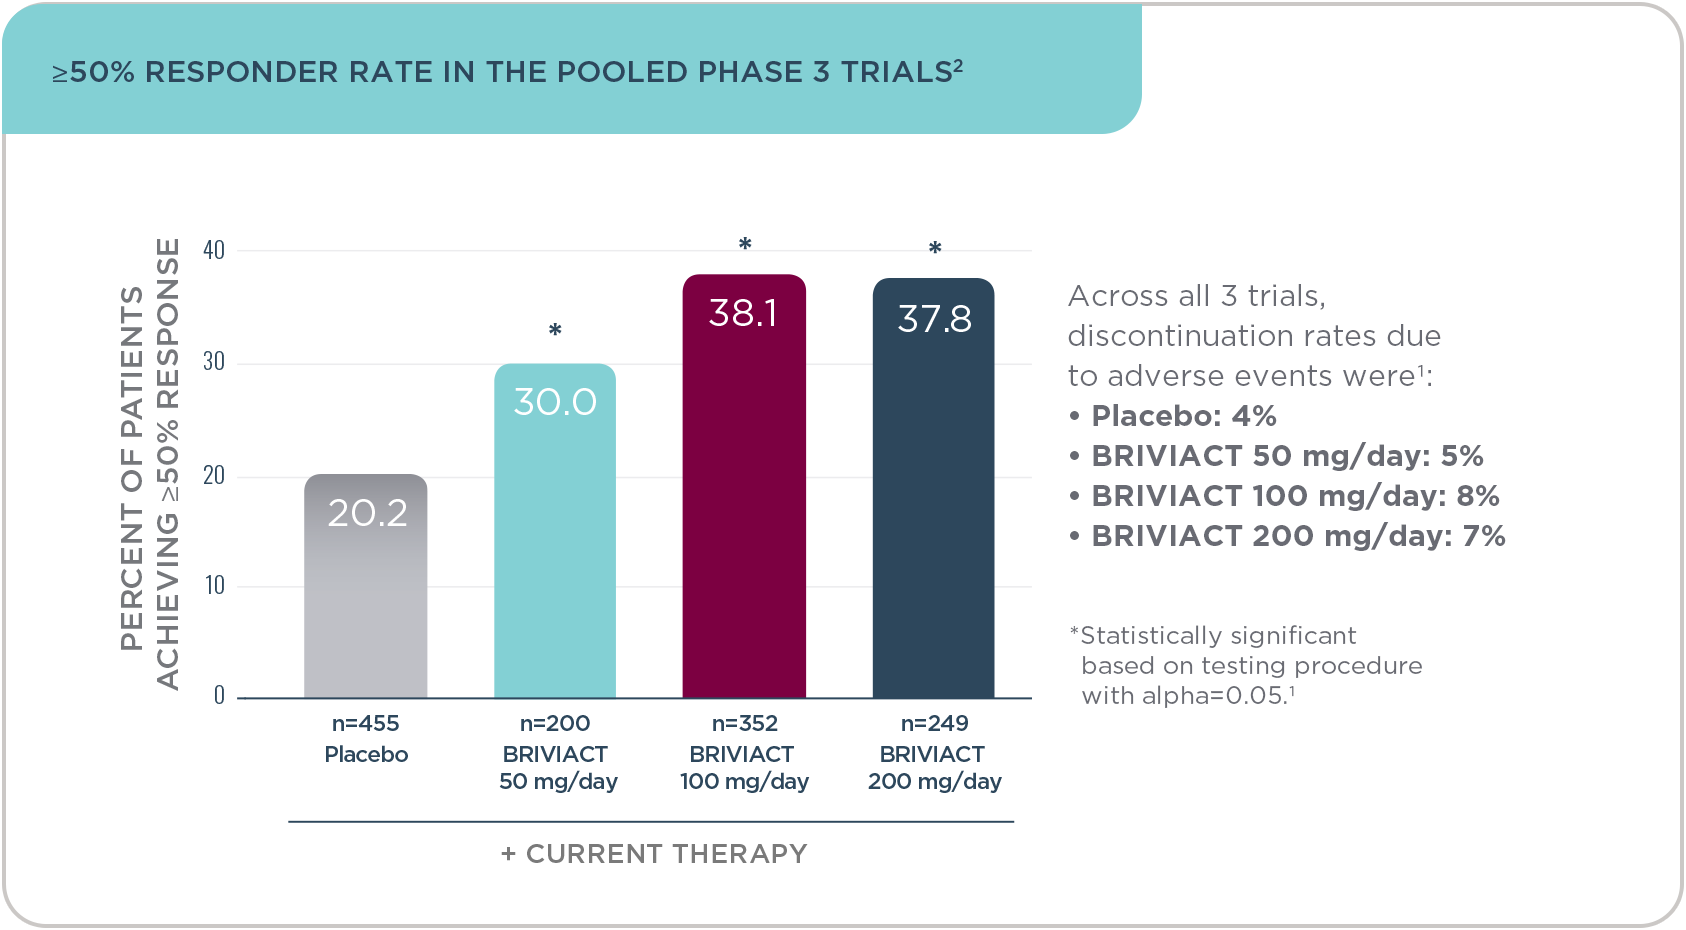 ≥50% RESPONDER RATE IN THE POOLED PHASE 3 TRIALS2